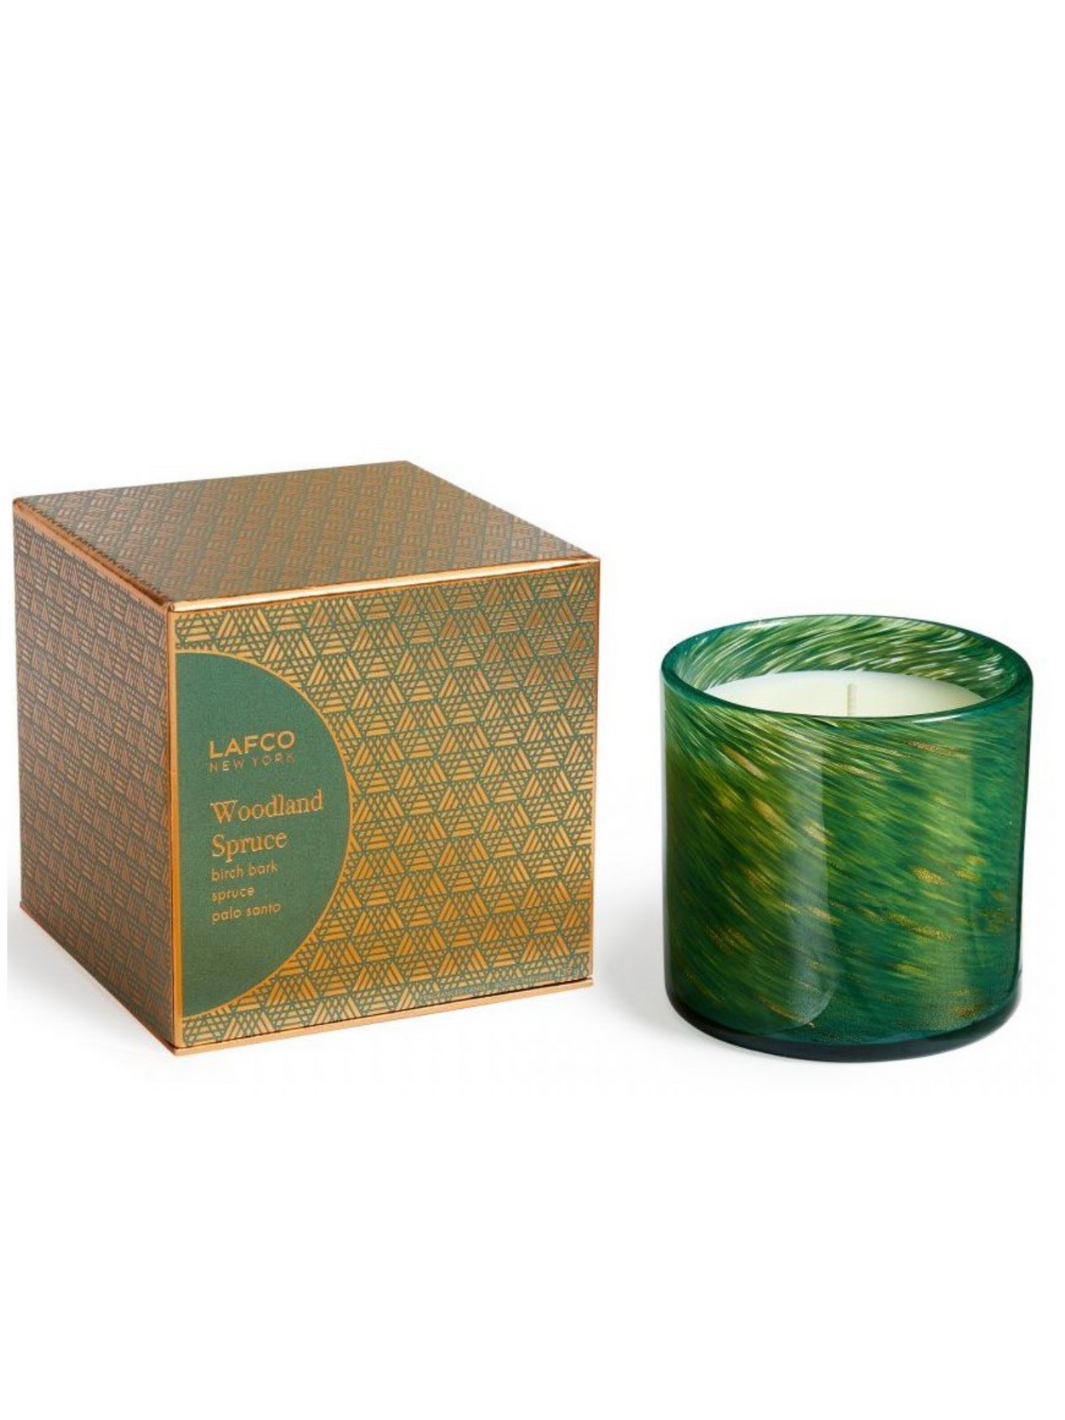 WOODLAND SPRUCE CANDLE 15.5OZ - Romi Boutique